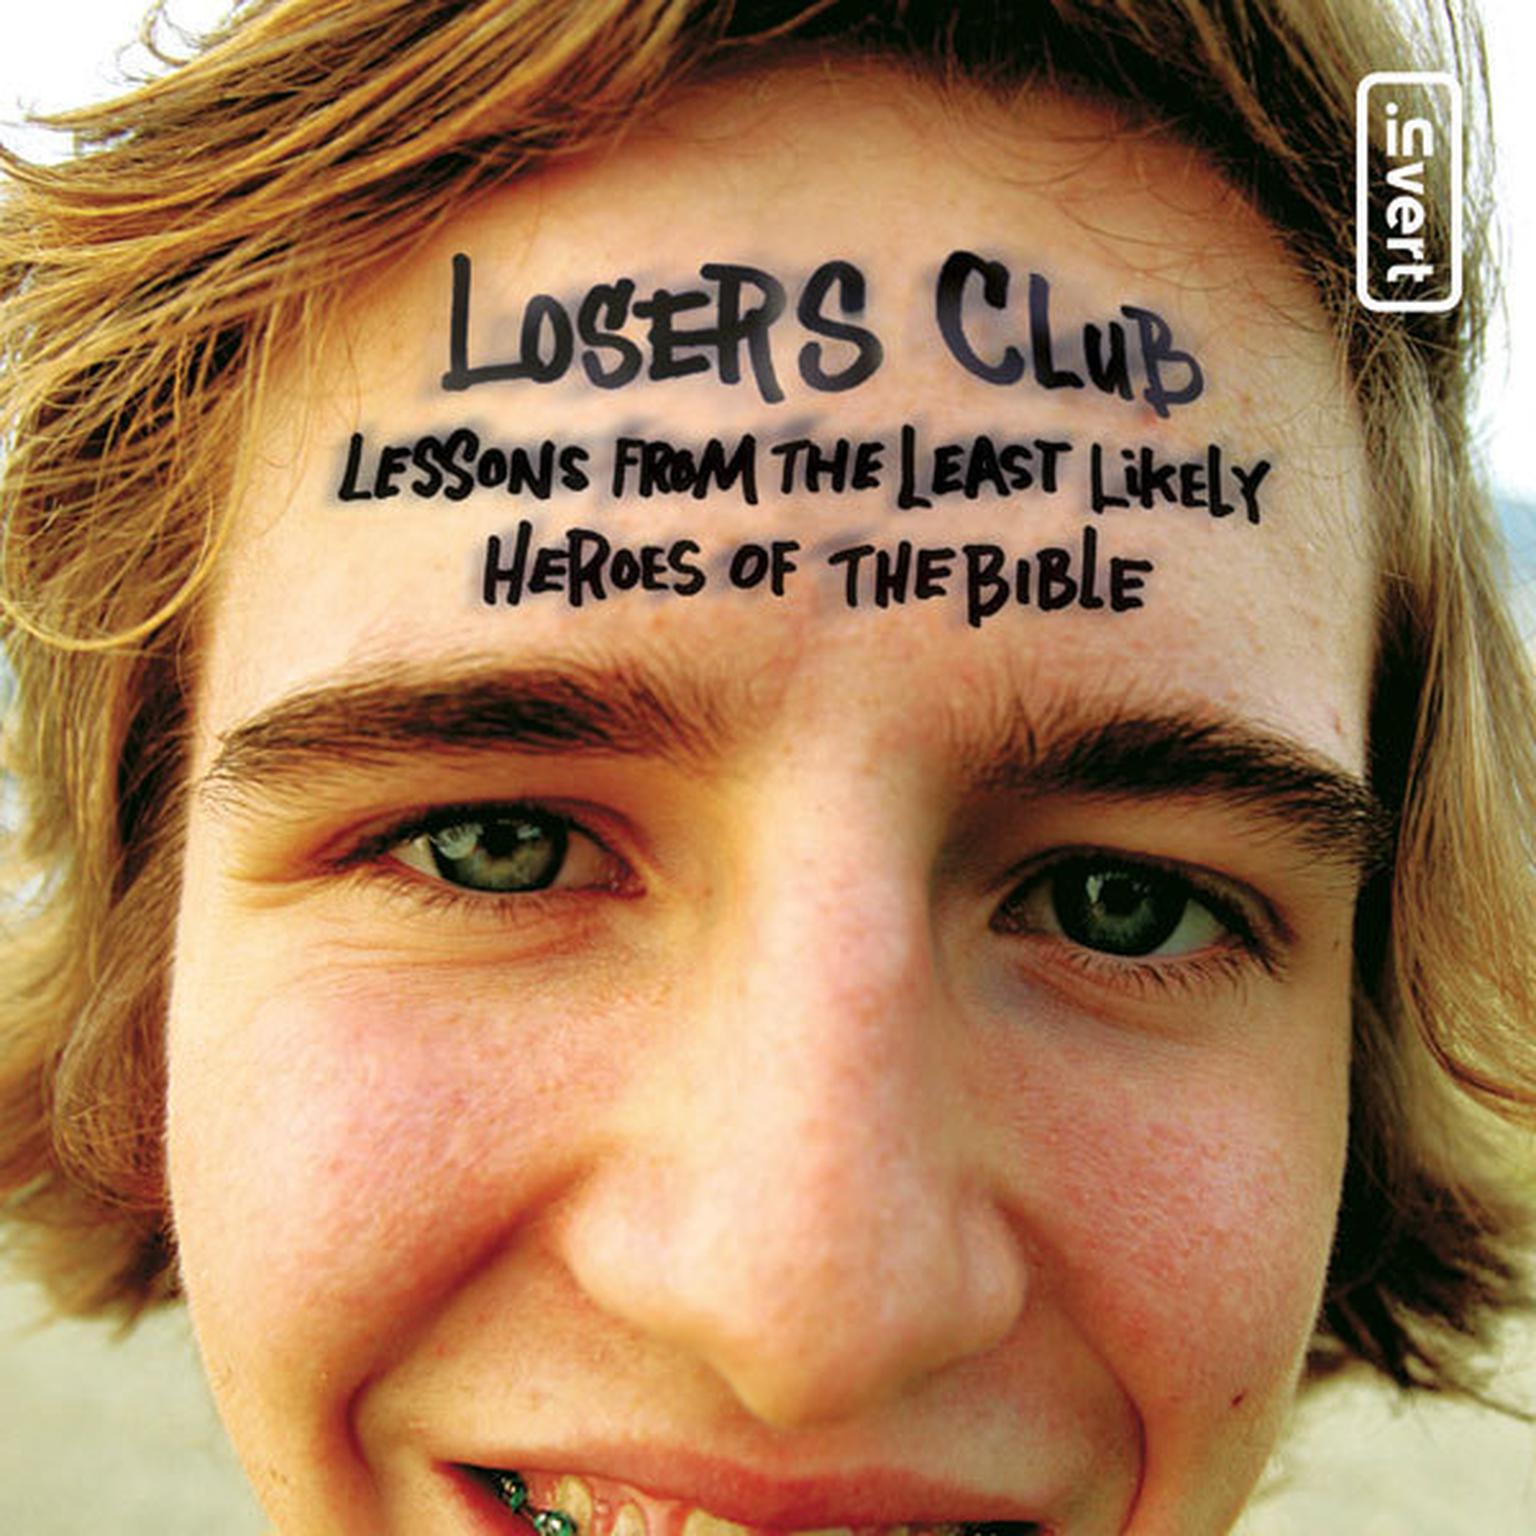 The Losers Club: Lessons from the Least Likely Heroes of the Bible Audiobook, by Jeff Kinley